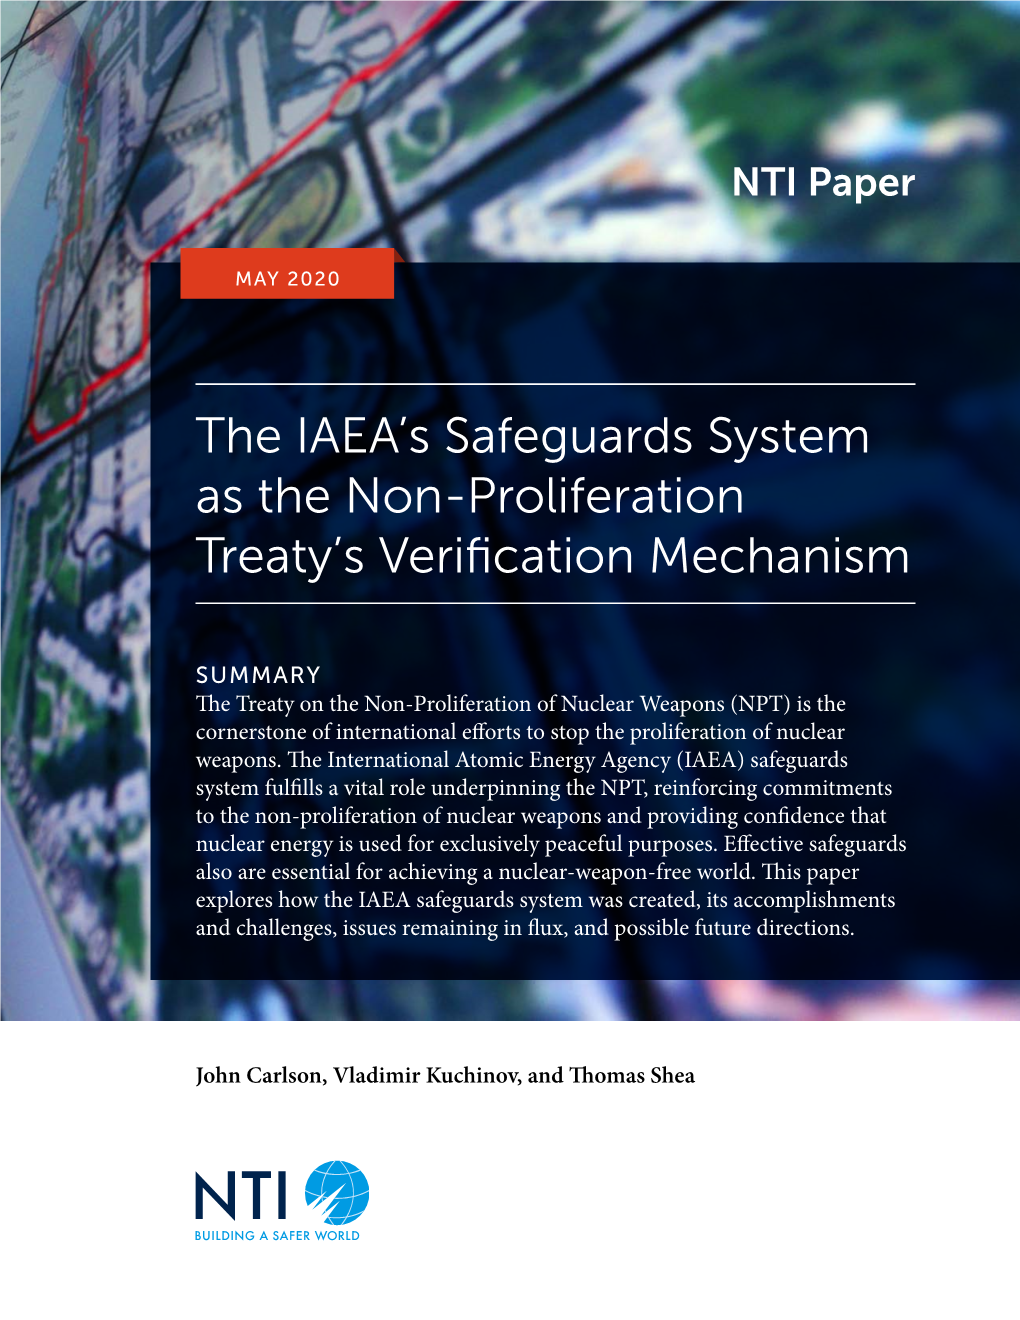 The IAEA's Safeguards System As the Non-Proliferation Treaty's